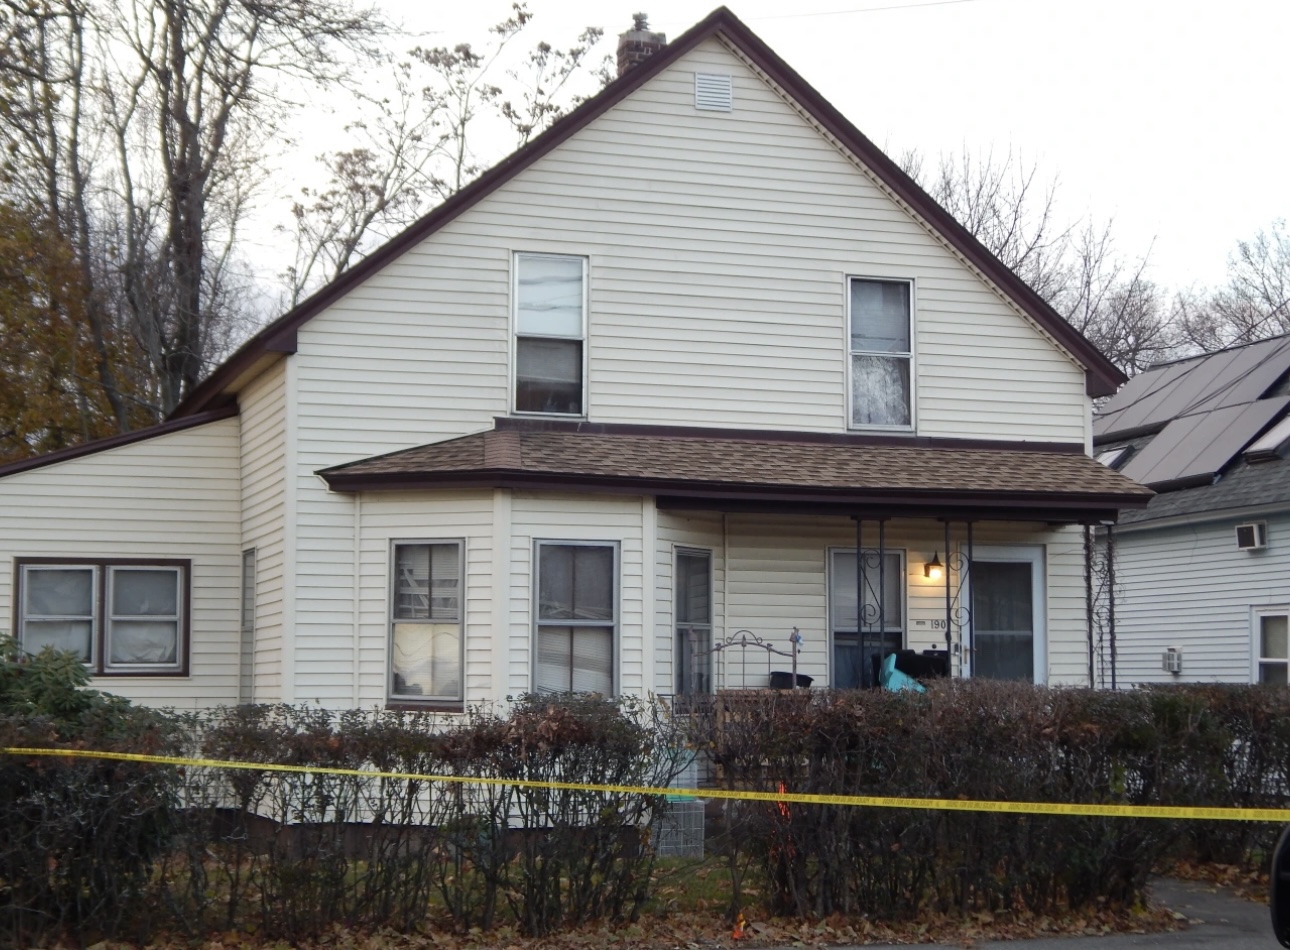 The Body of a Man Was Found In a Lowell Home